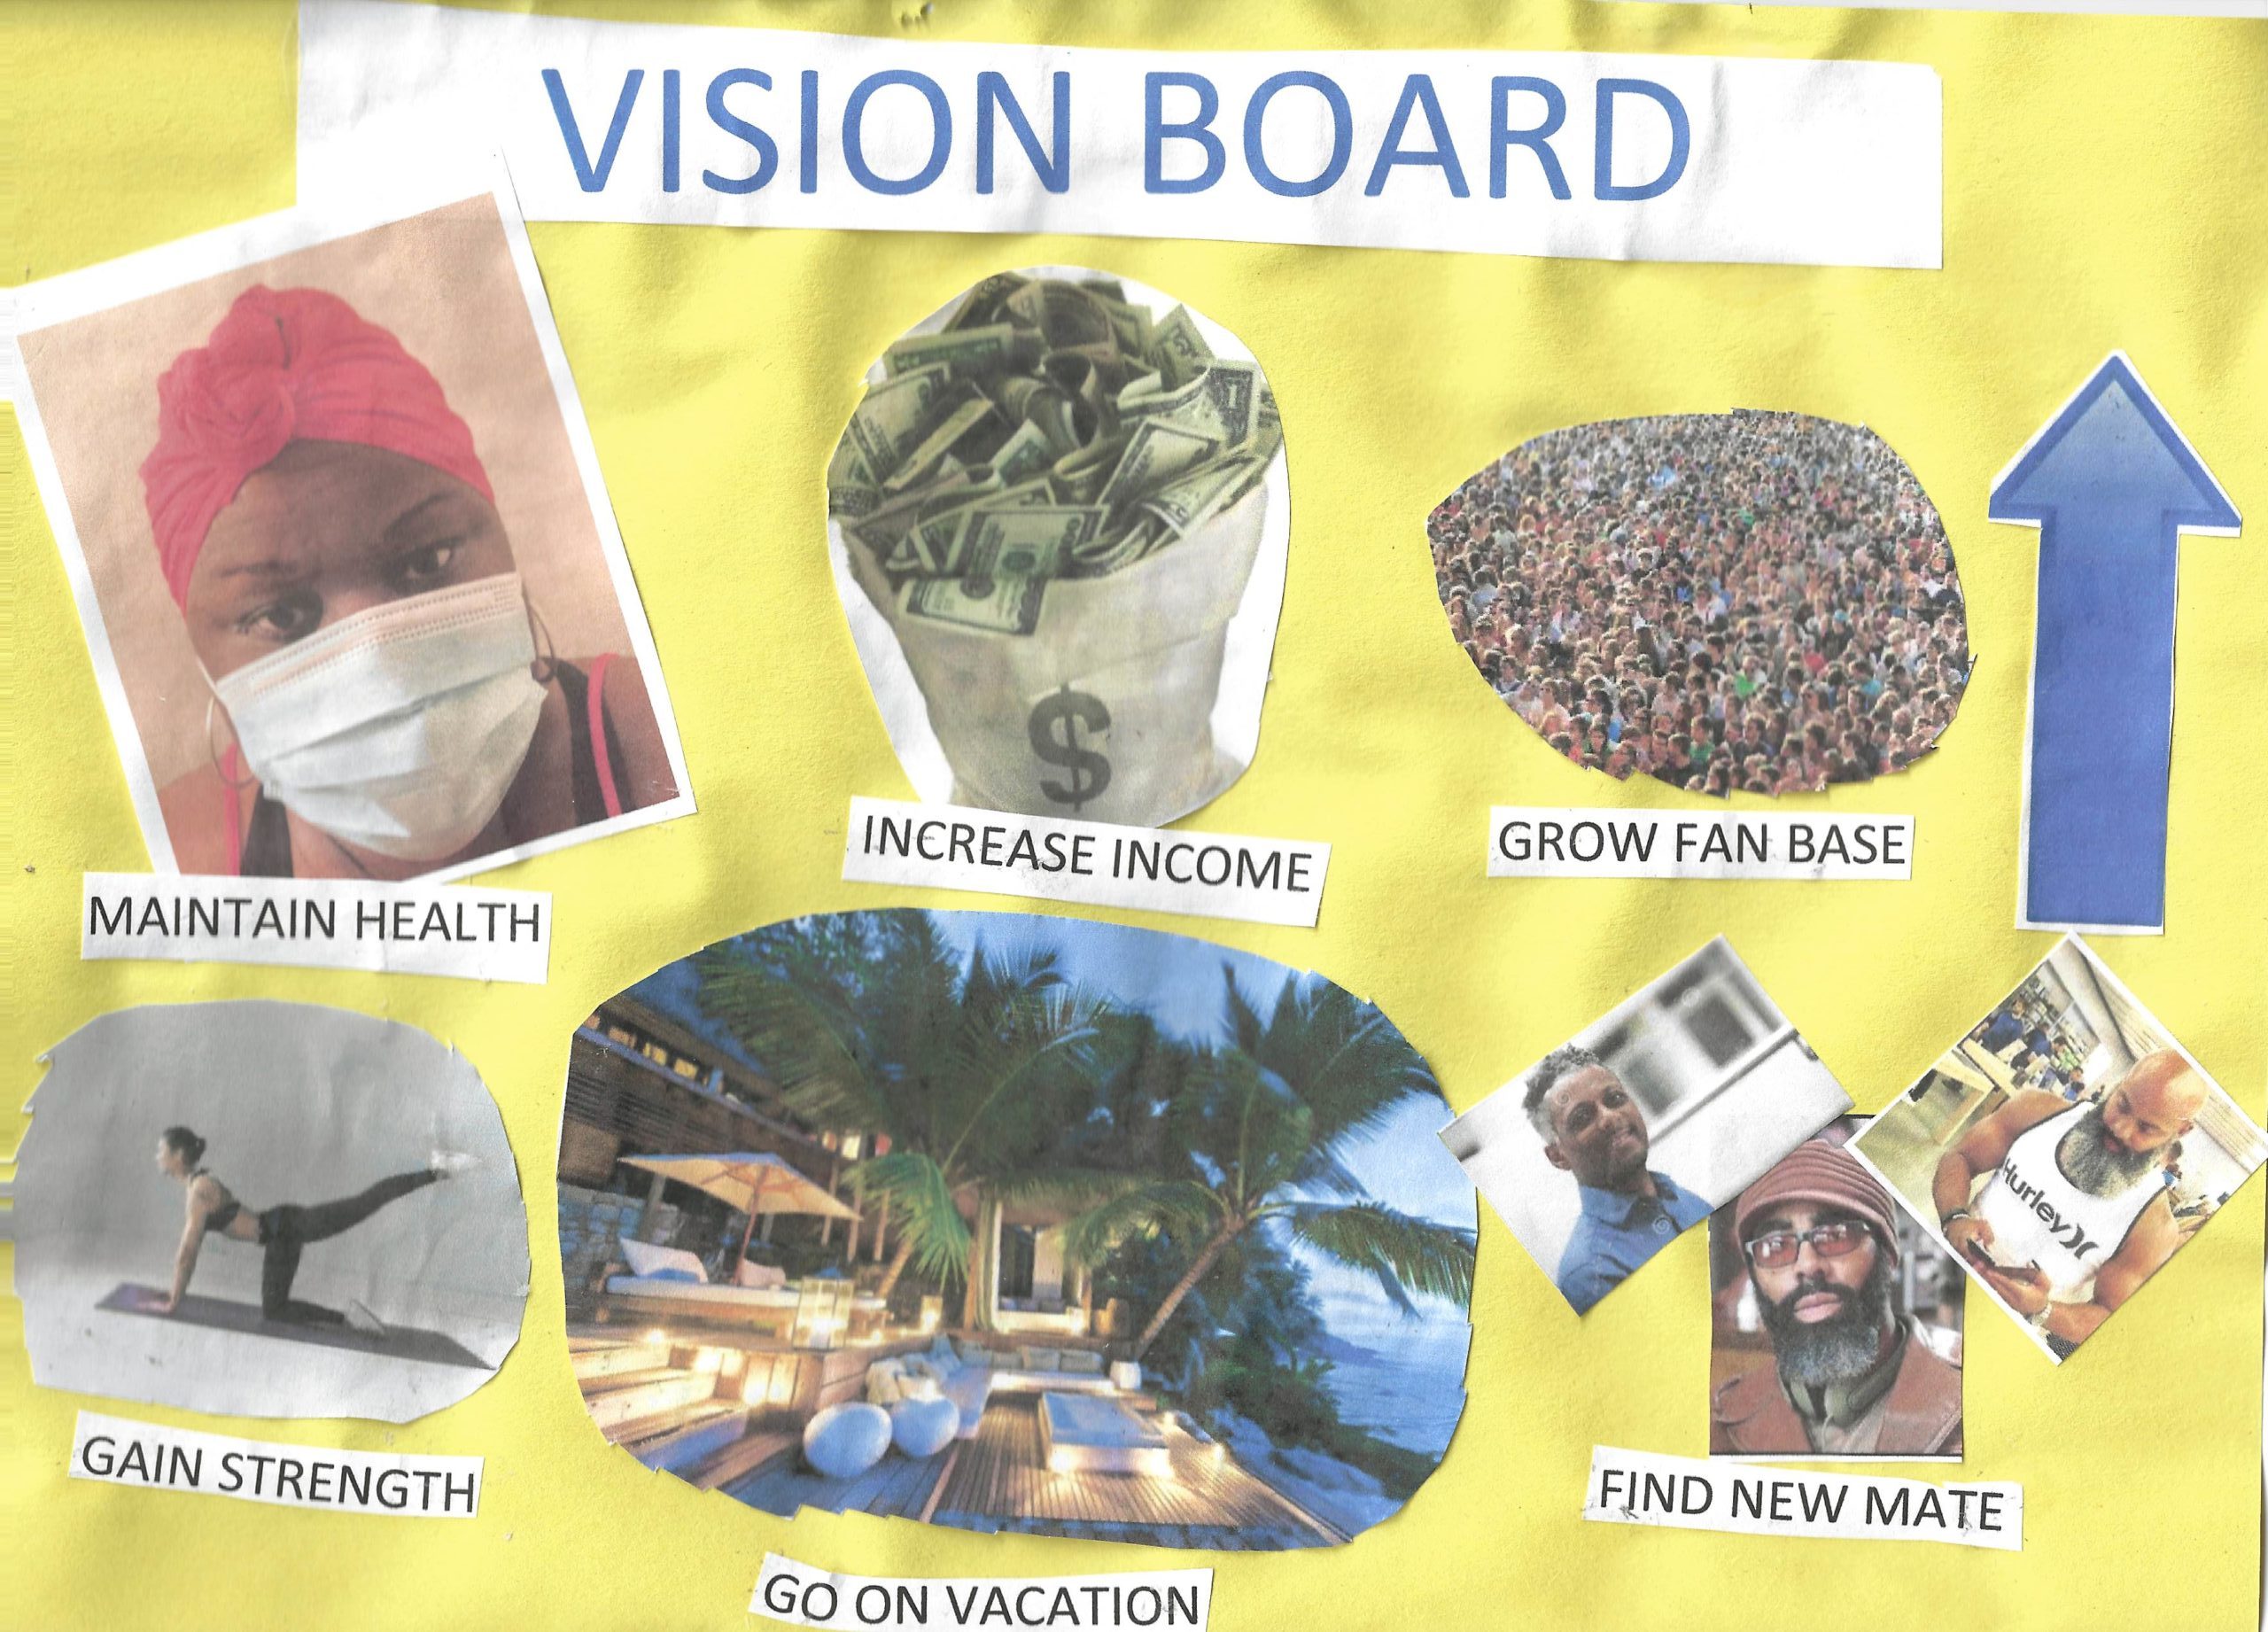 A sample of a completed vision board